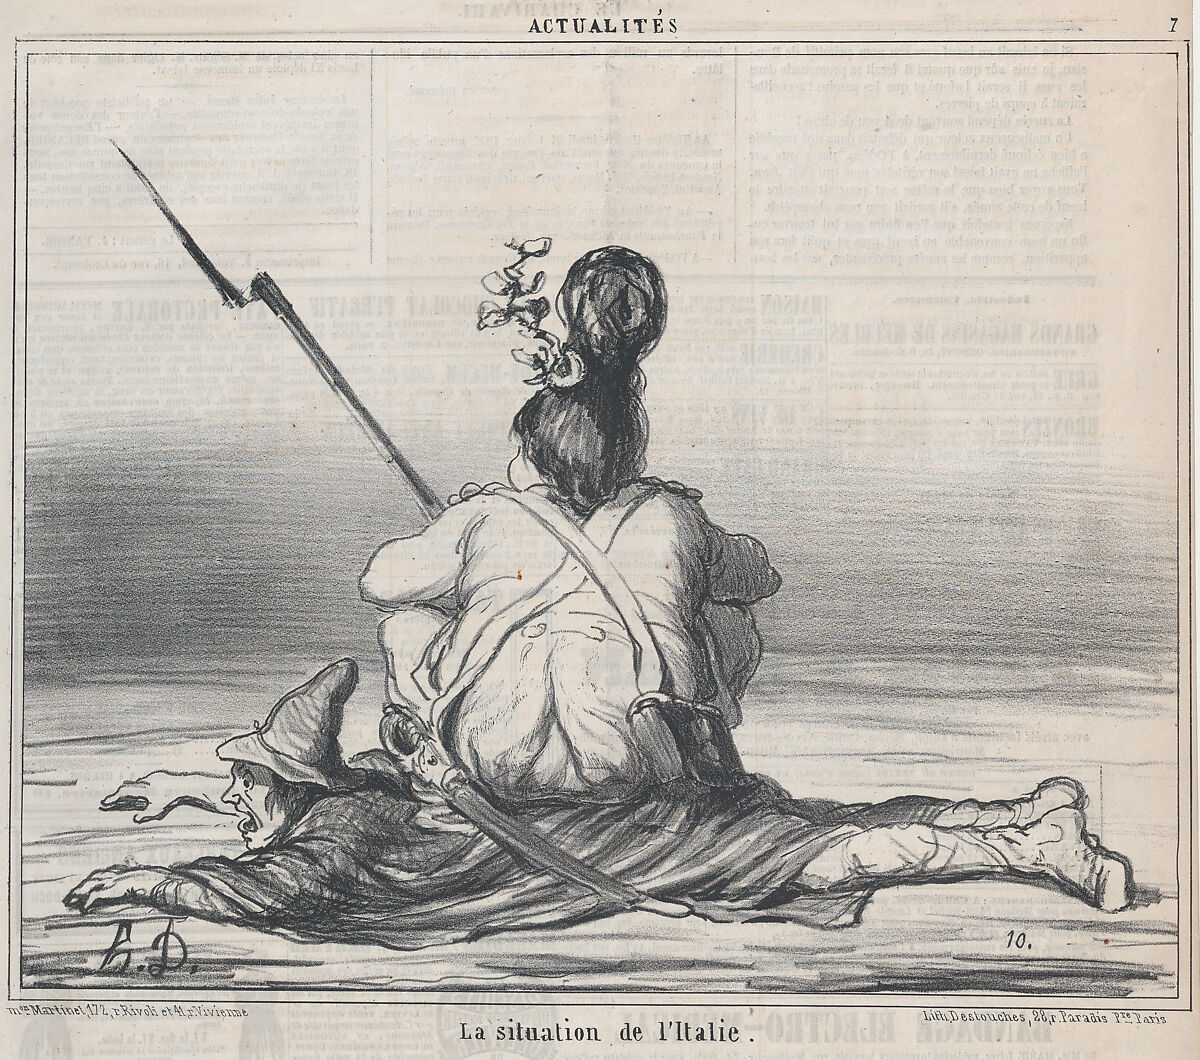 La situation de l'Italie, from Actualités, published in Le Charivari, February 21, 1859, Honoré Daumier (French, Marseilles 1808–1879 Valmondois), Lithograph on newsprint; second state of three (Hazard & Delteil) 